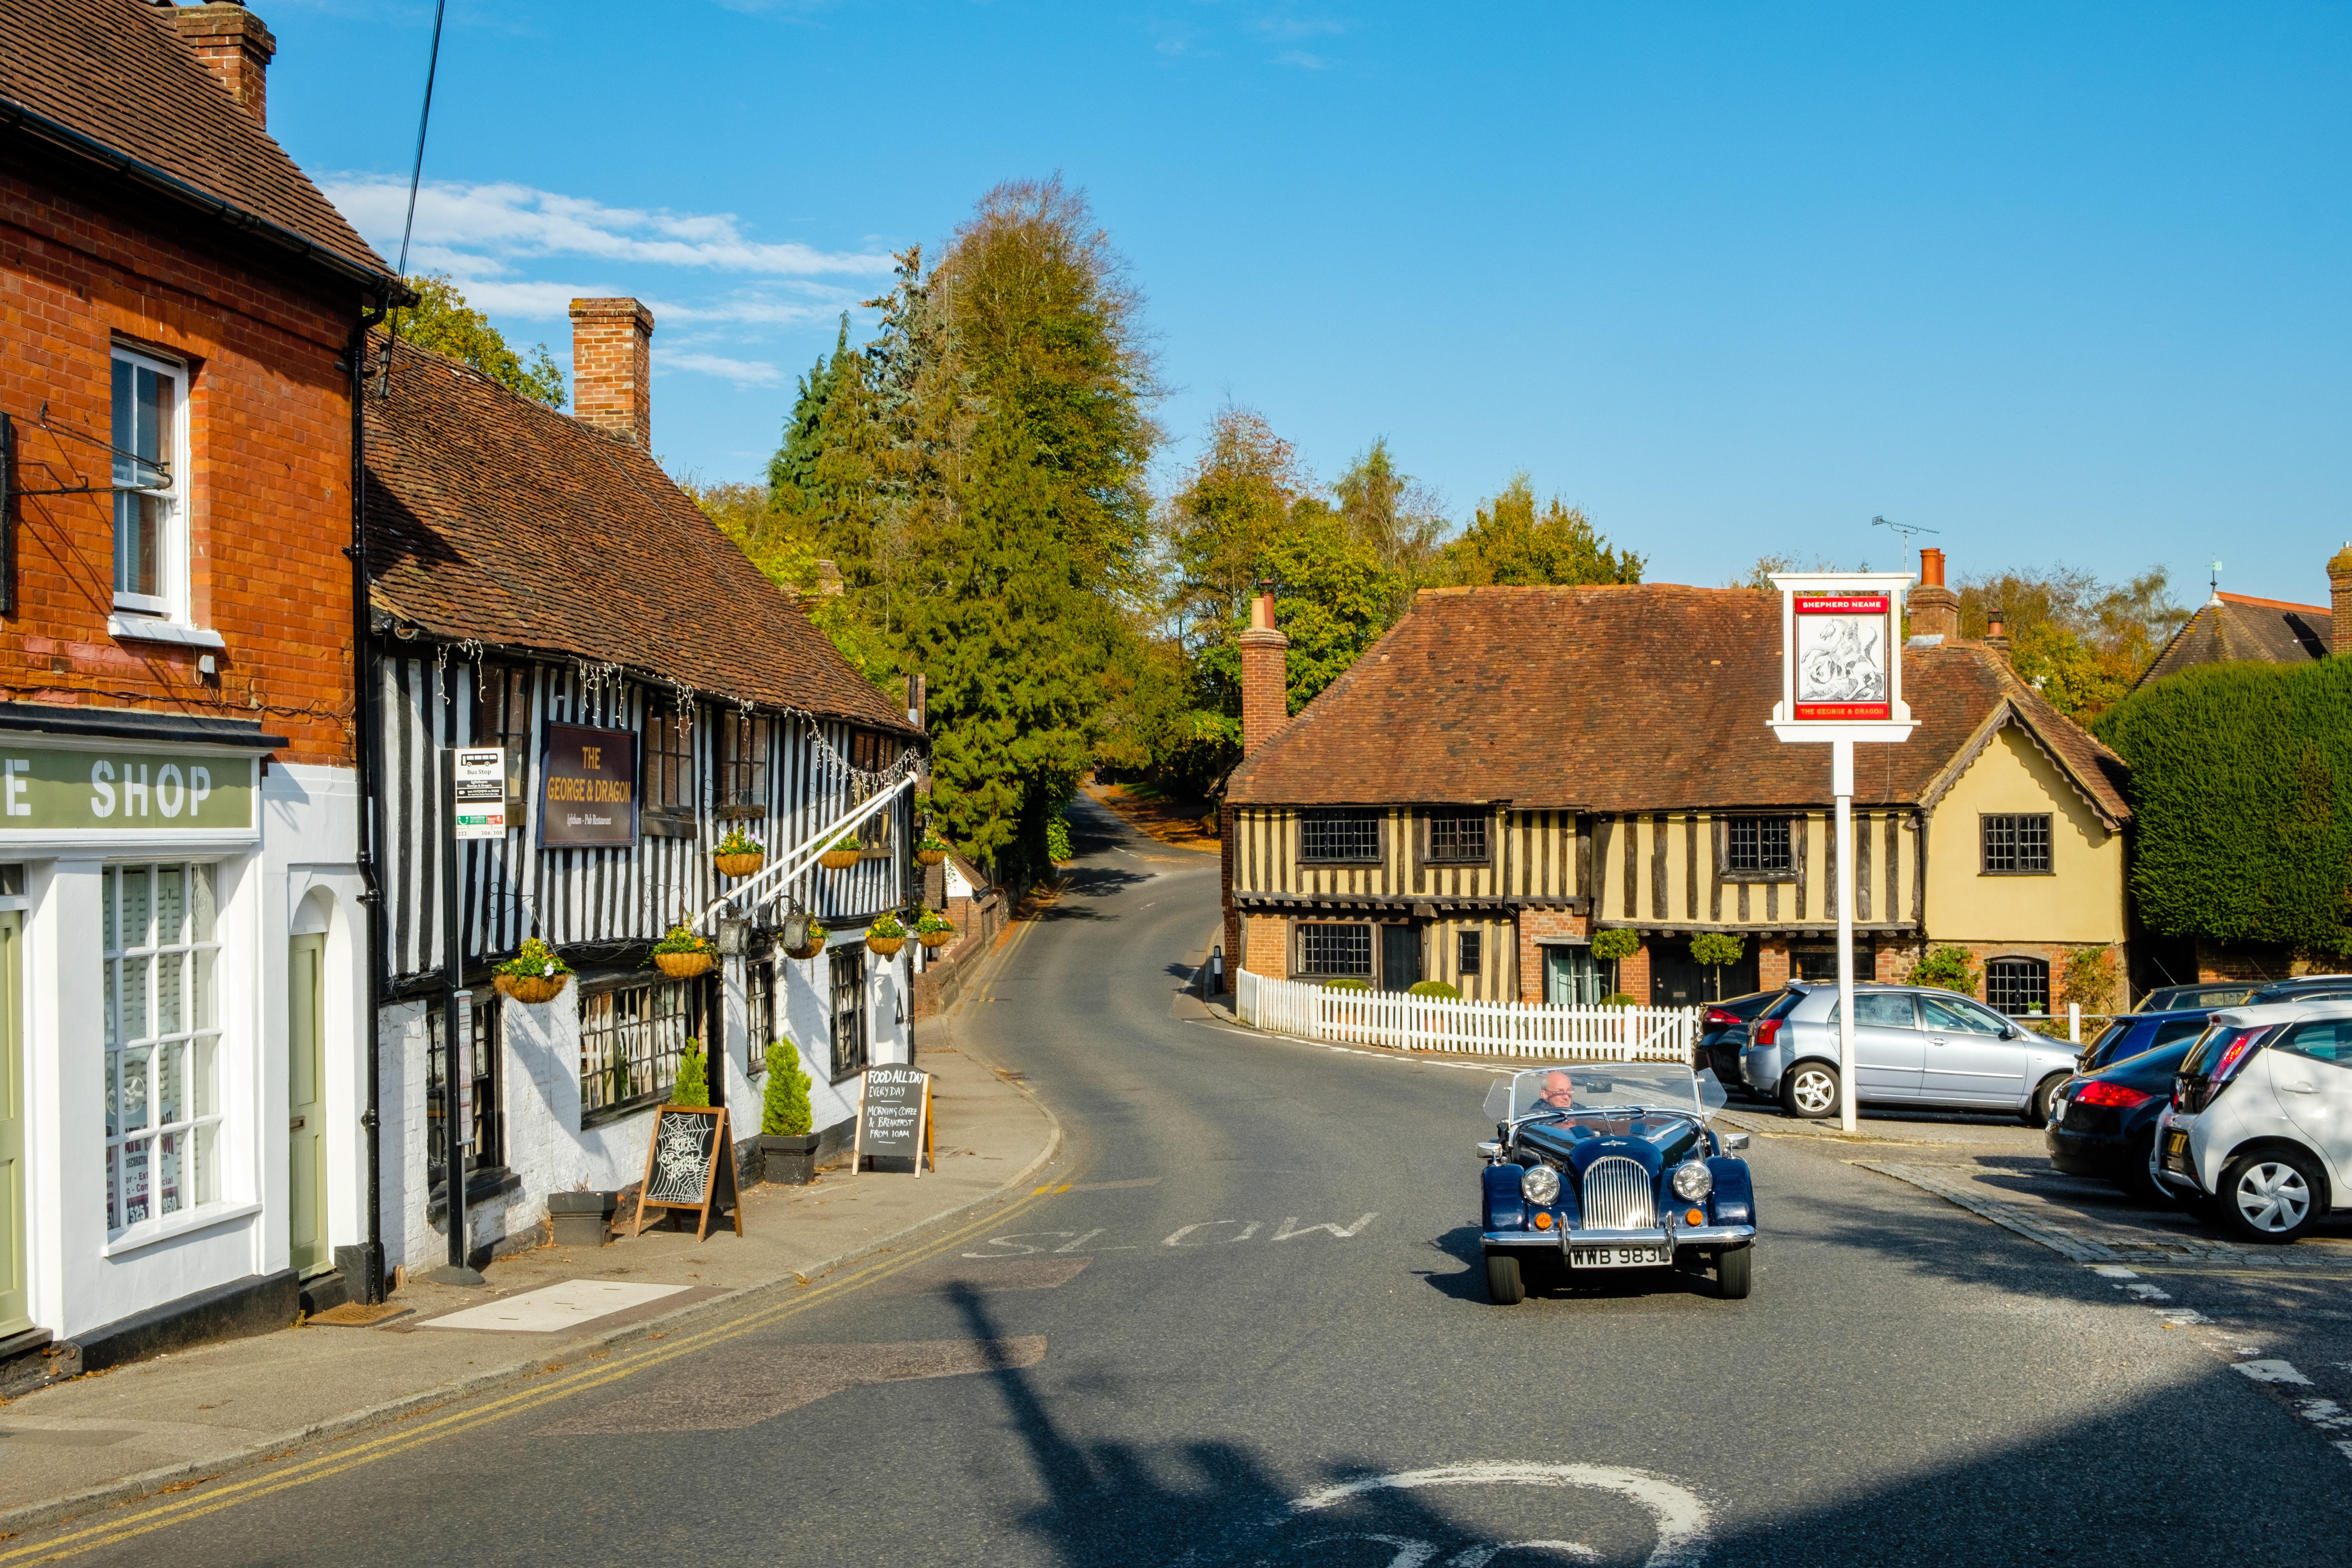 Ightham is around an hour from London, and near Sevenoaks